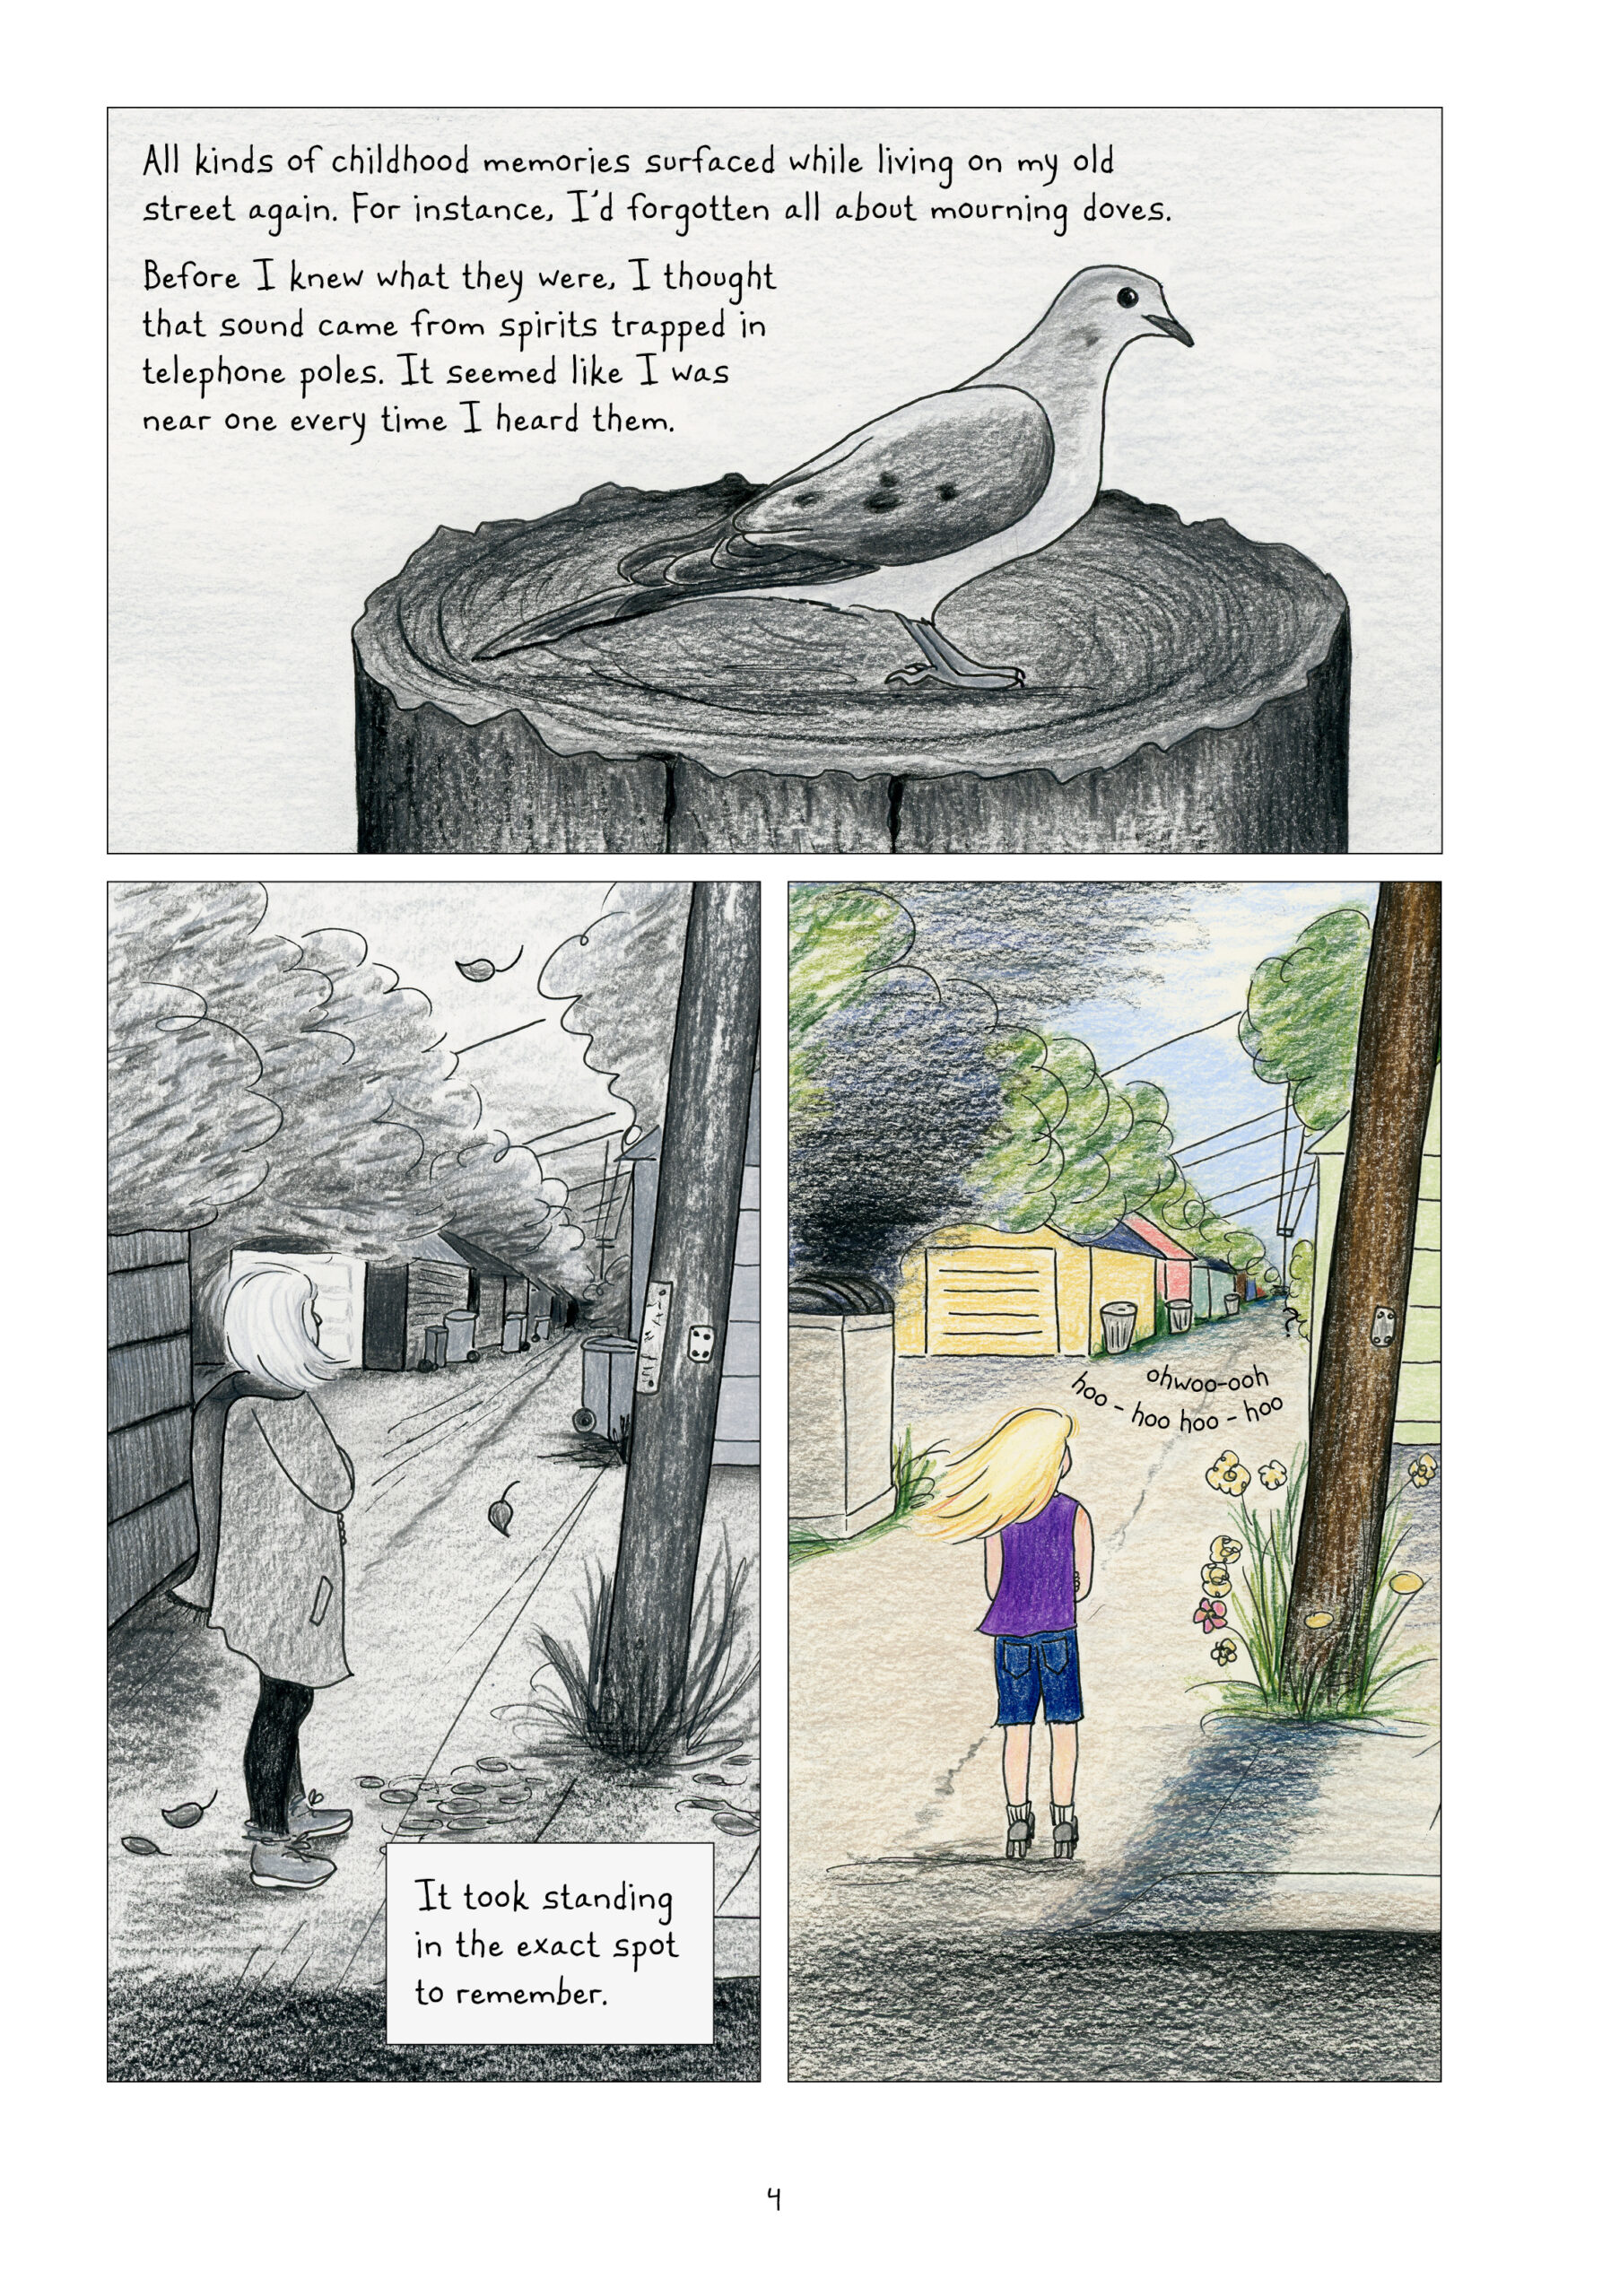 Elsewhere, p.3
Lynn reminisces on childhood memories, like the mourning doves on her old street. 
The last two panels are parallel, with the present-day Lynn (in black and white) standing in the same spot and position as younger Lynn, drawn in full color.